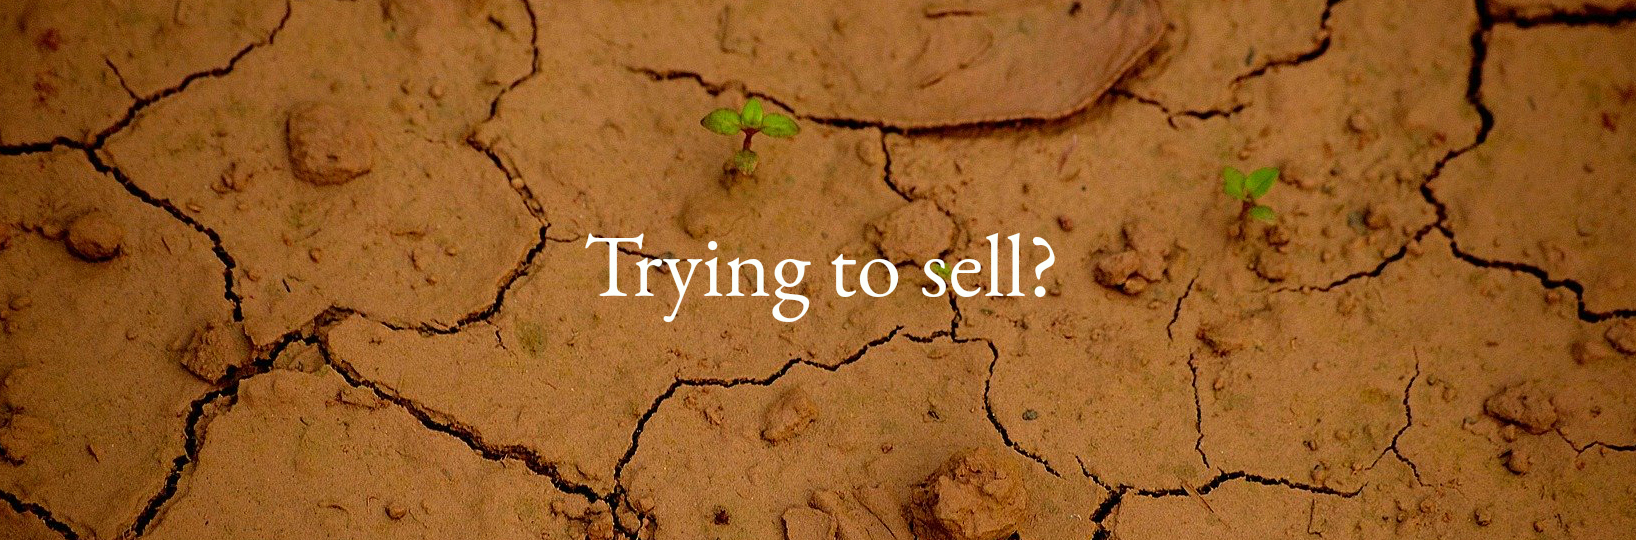 trying_to_sell